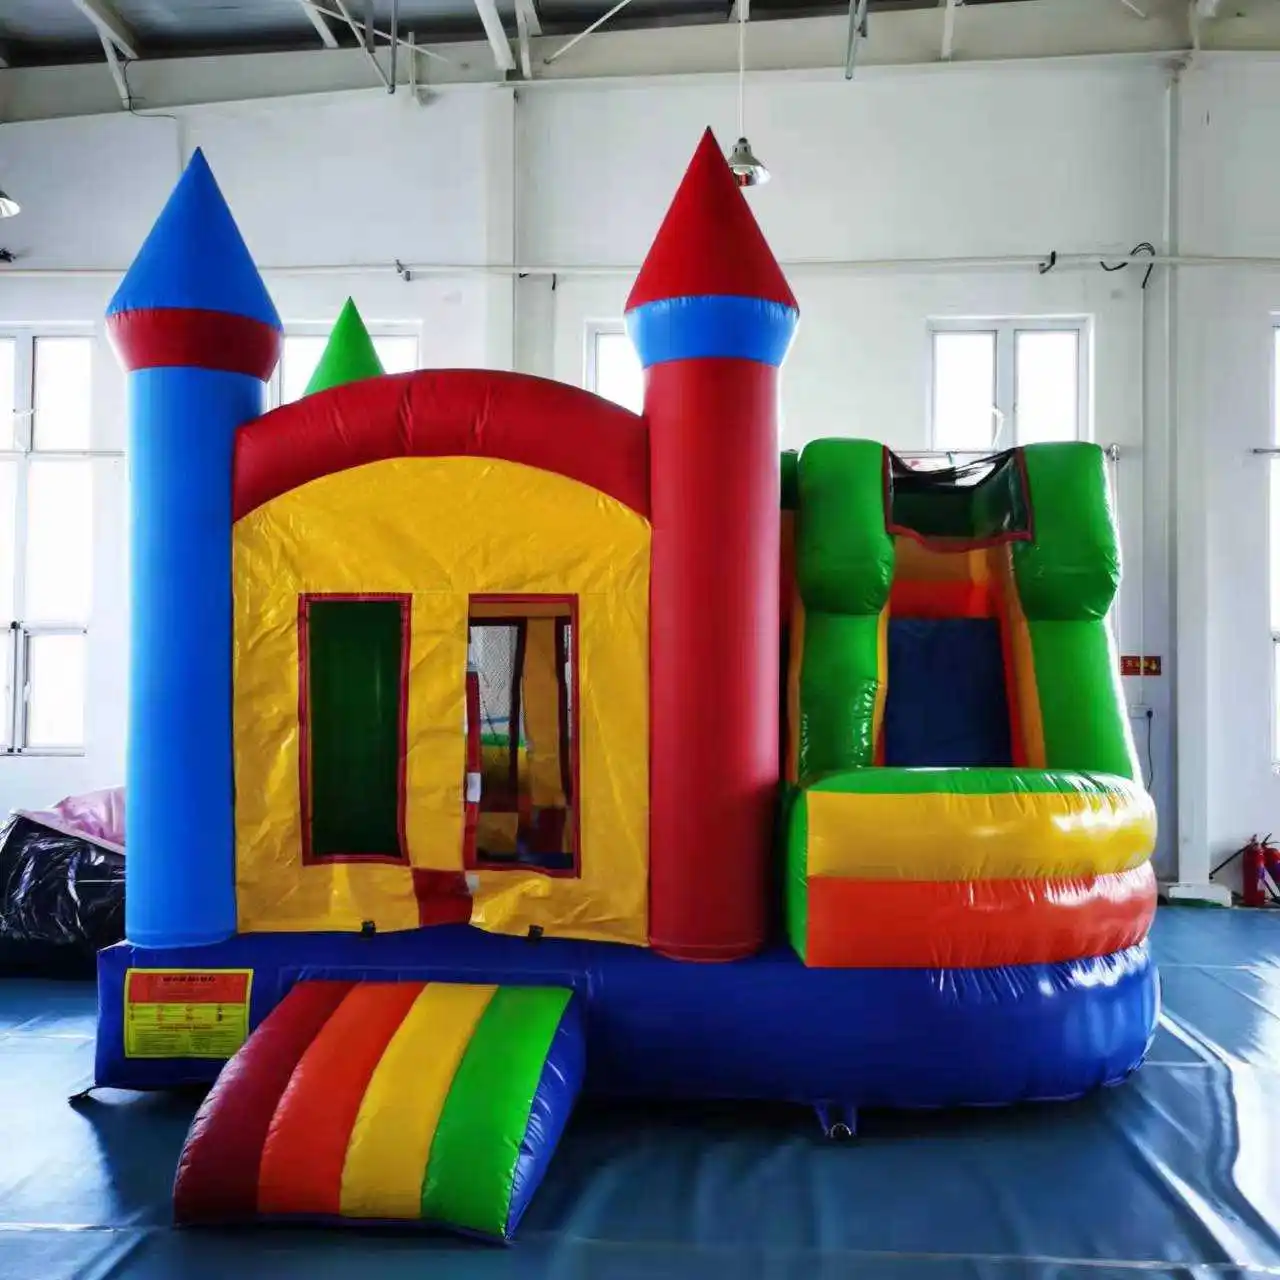 

5*4M bounce house bounce castle indoor playground inflatables for adults and children